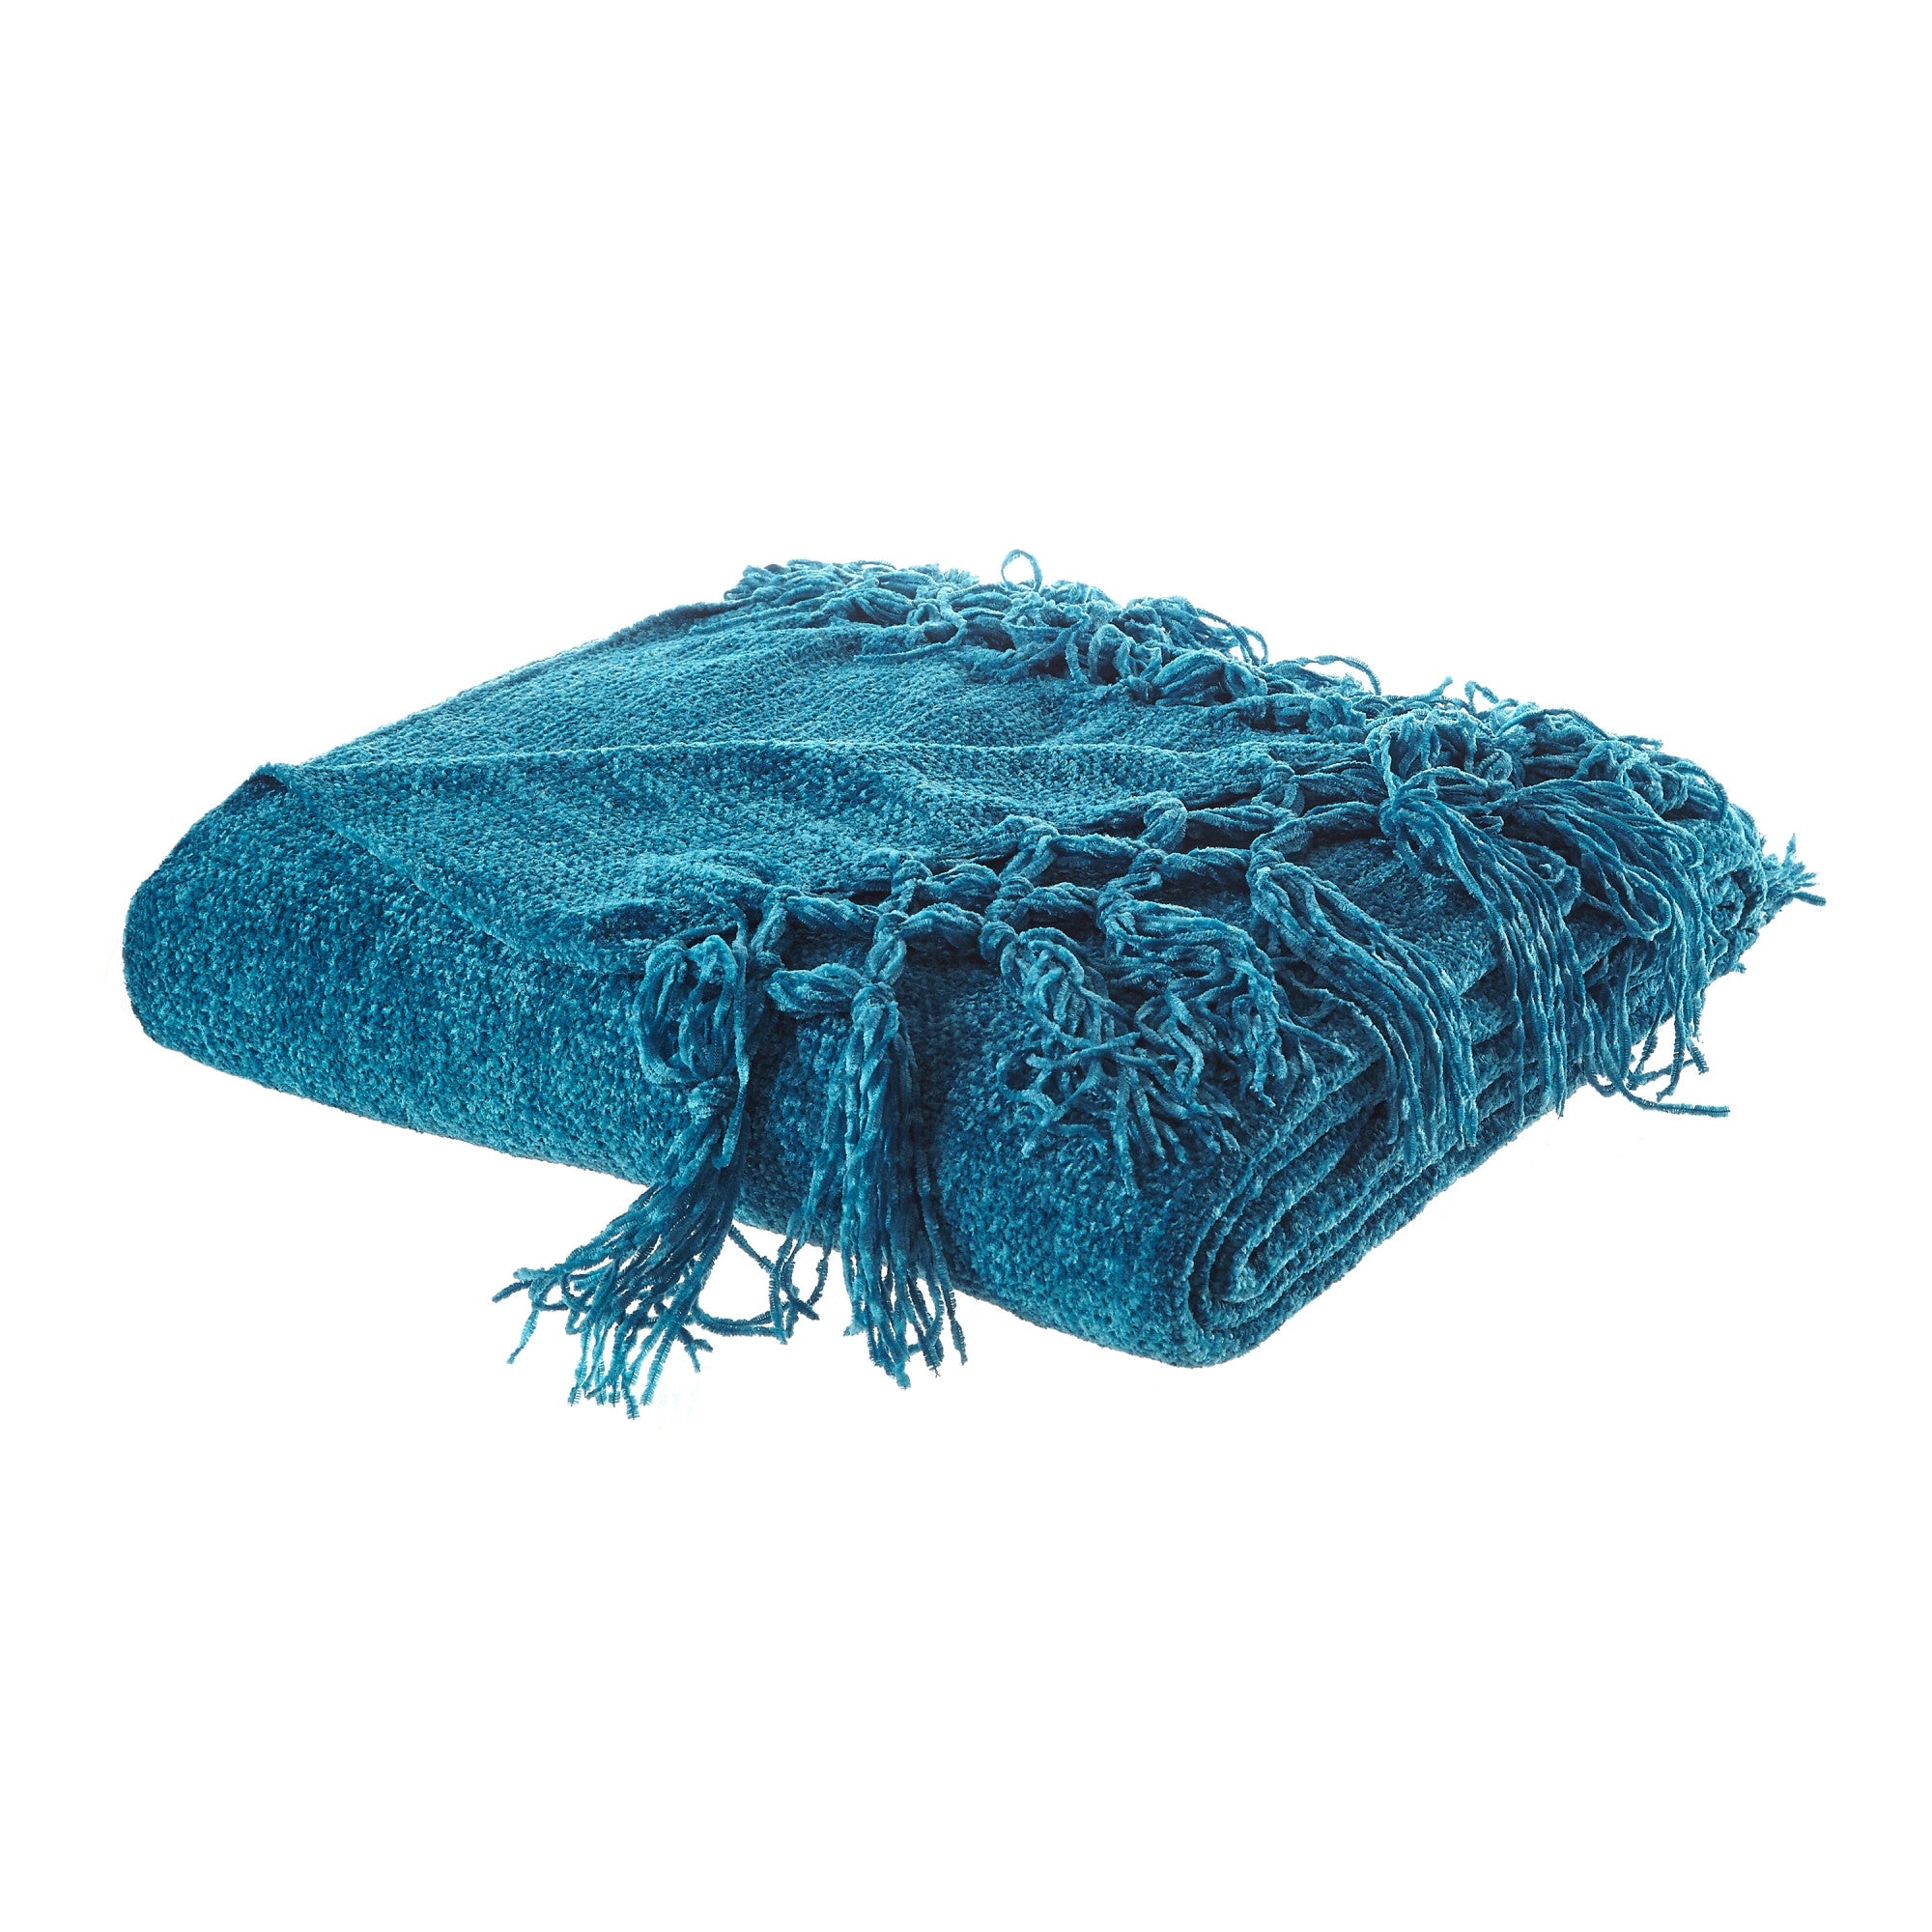 Teal Blue Woven Polyester Solid Color Throw Blanket